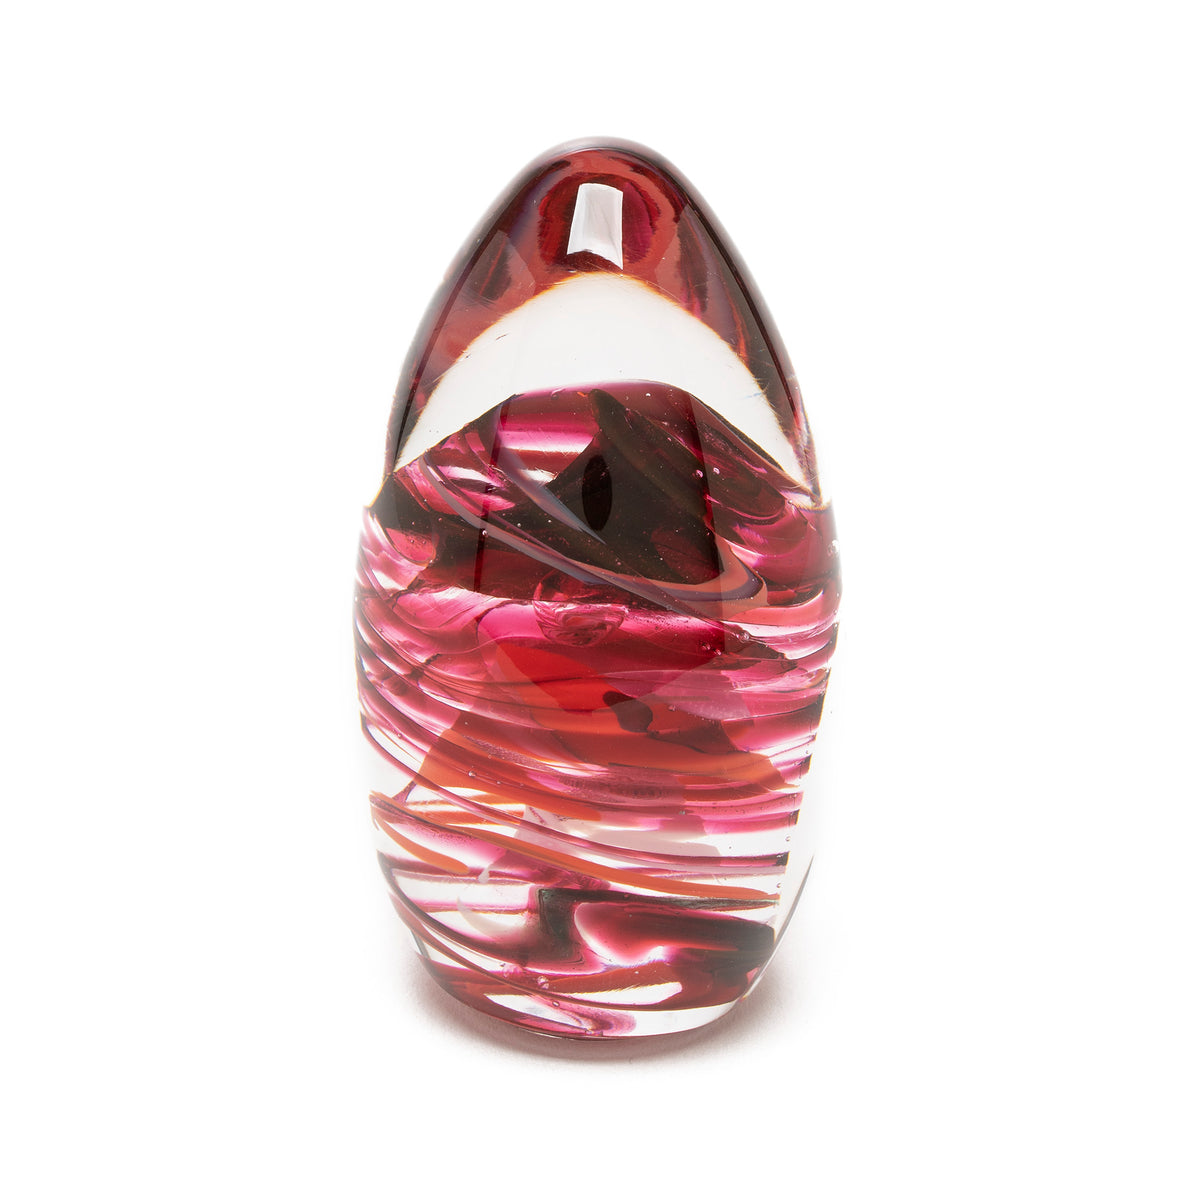 Paperweight Egg - Red